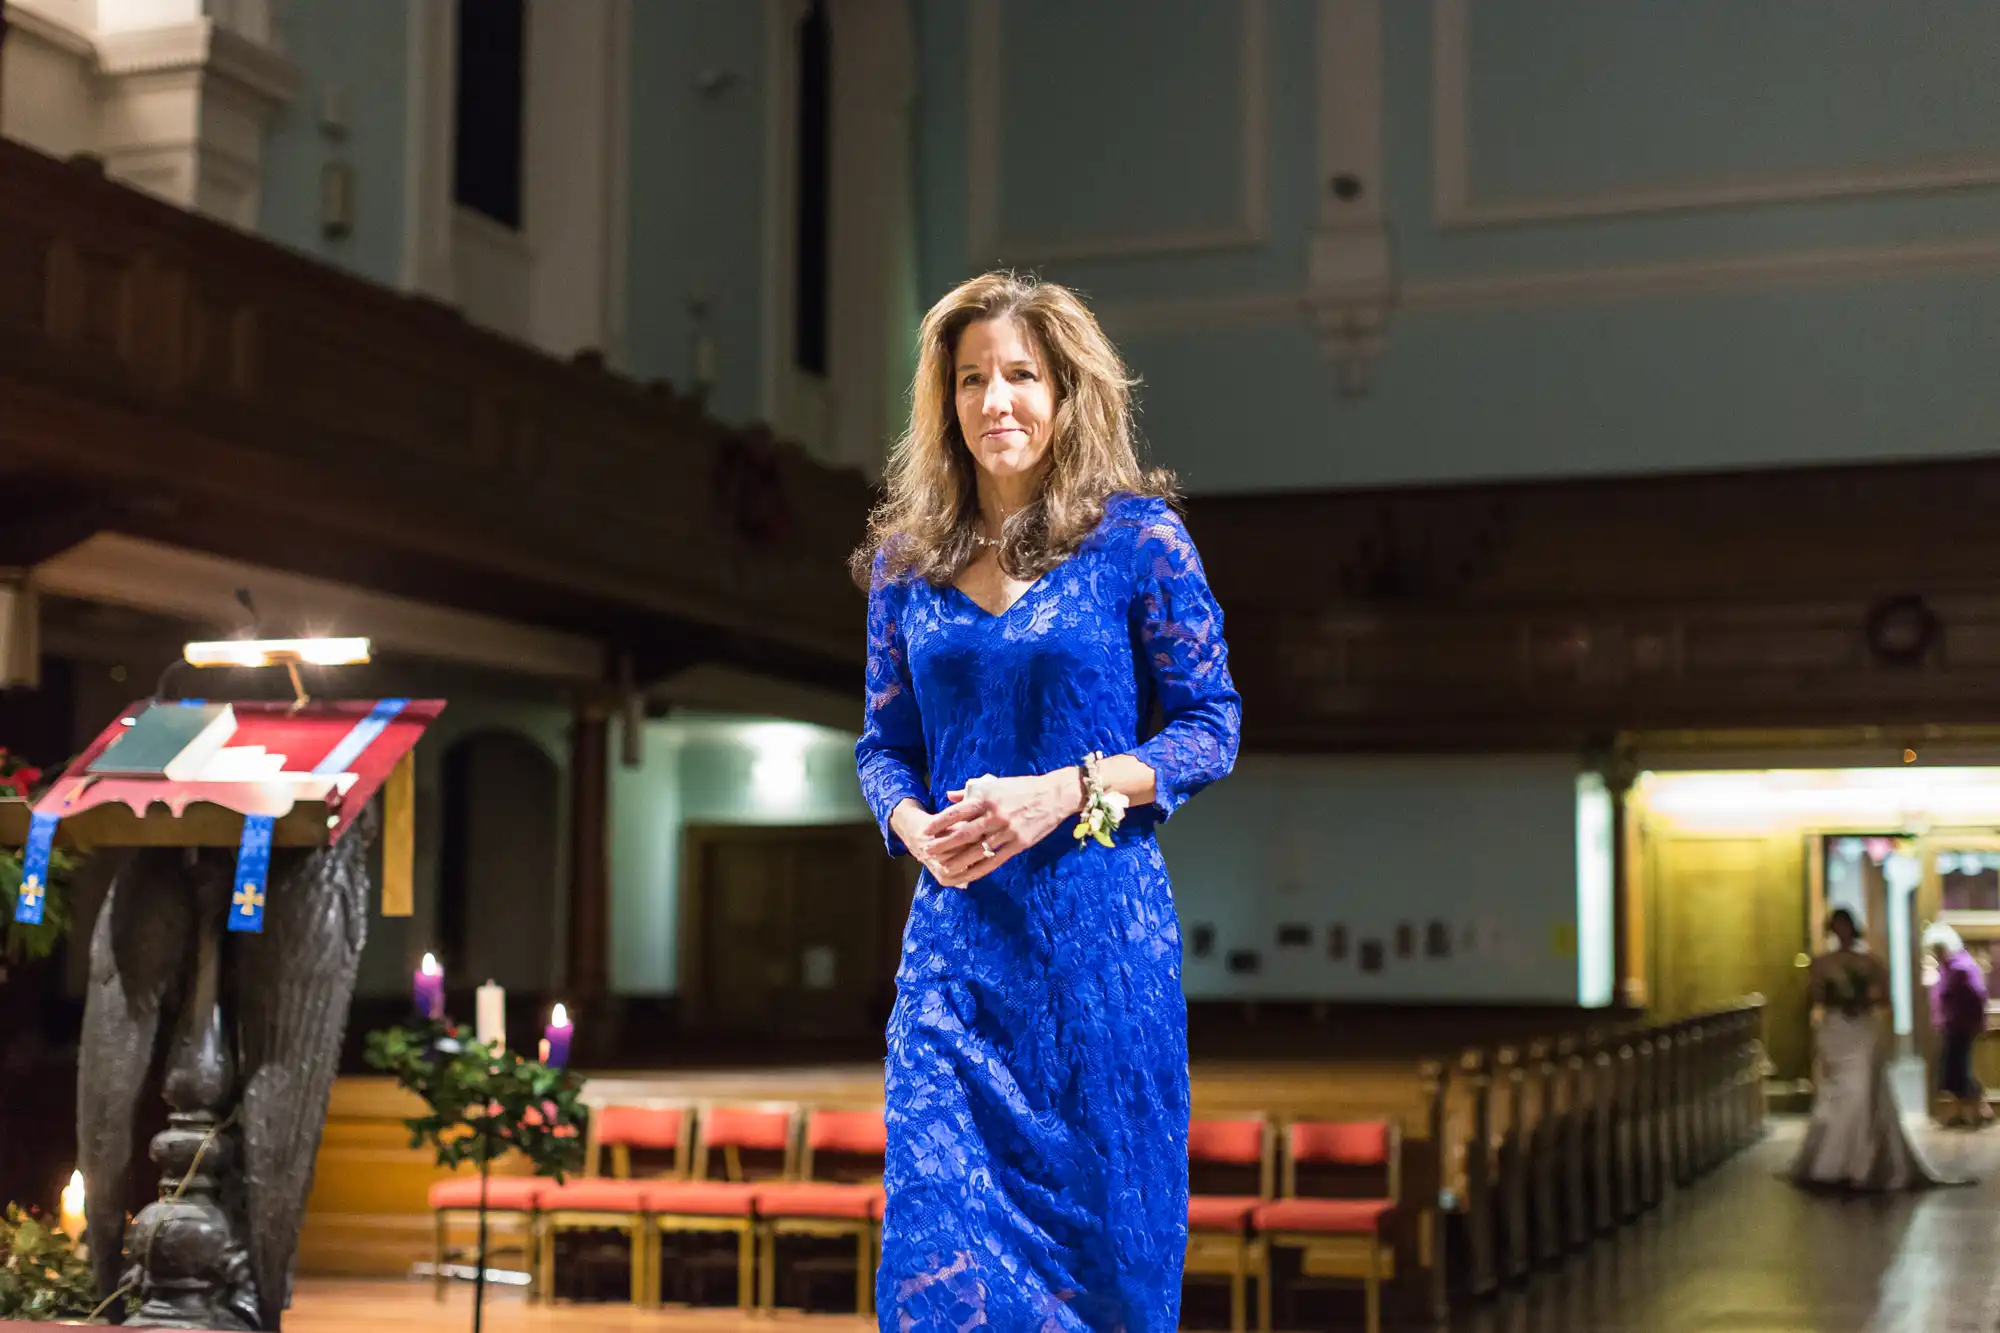 A woman in a blue lace dress stands in the aisle of a church, with pews and soft lighting in the background.